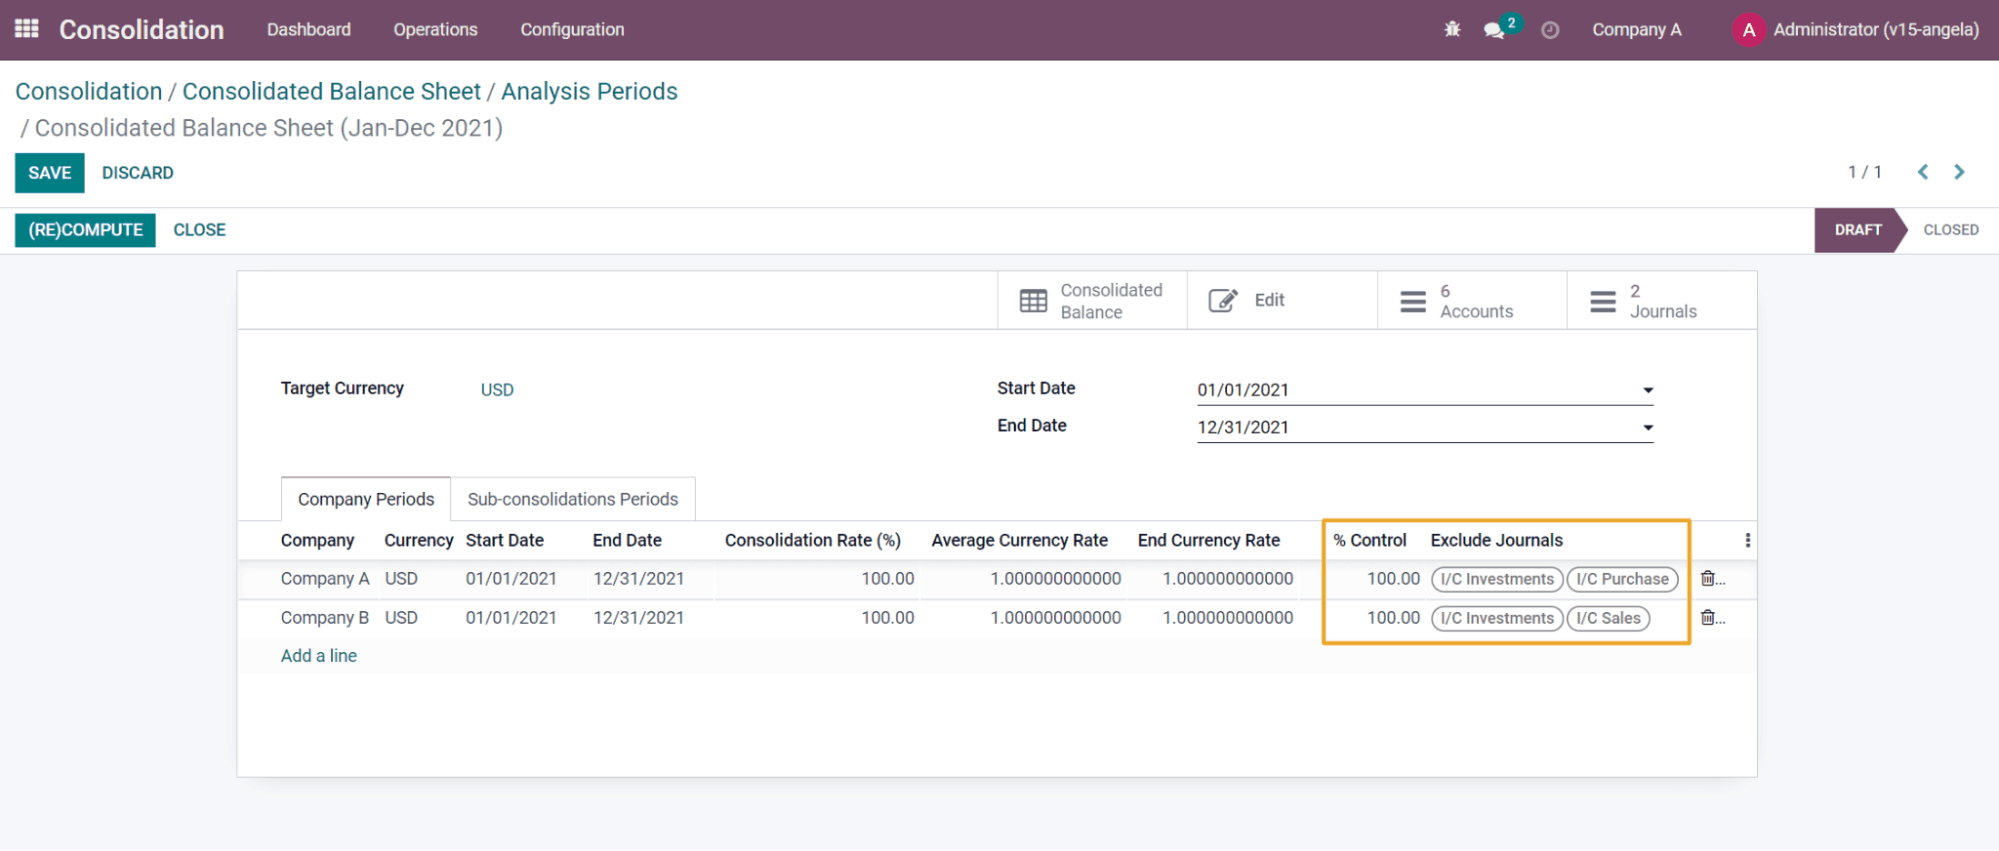 Odoo Consolidation - Exclude journals